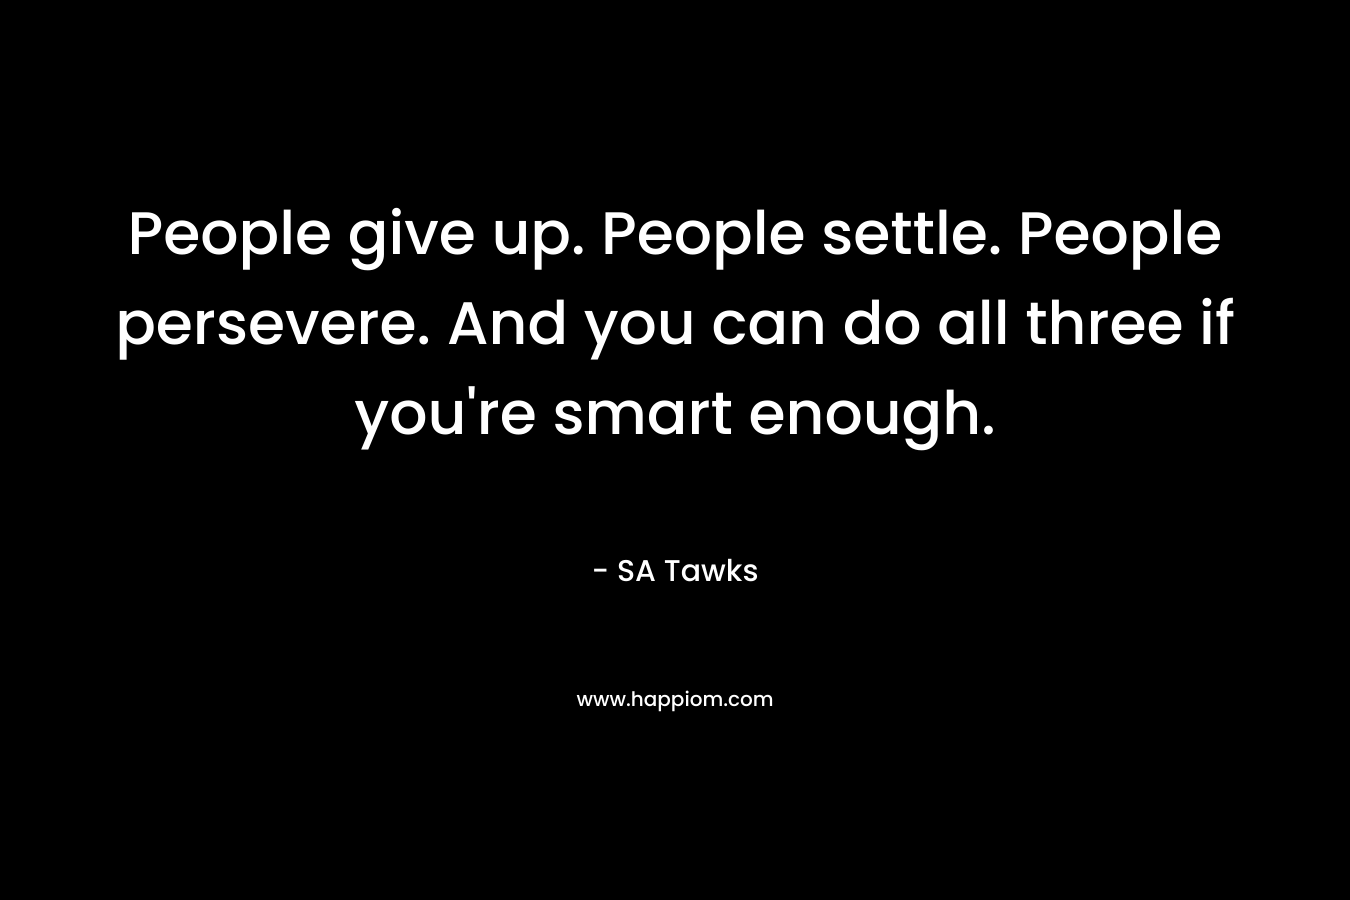 People give up. People settle. People persevere. And you can do all three if you're smart enough.